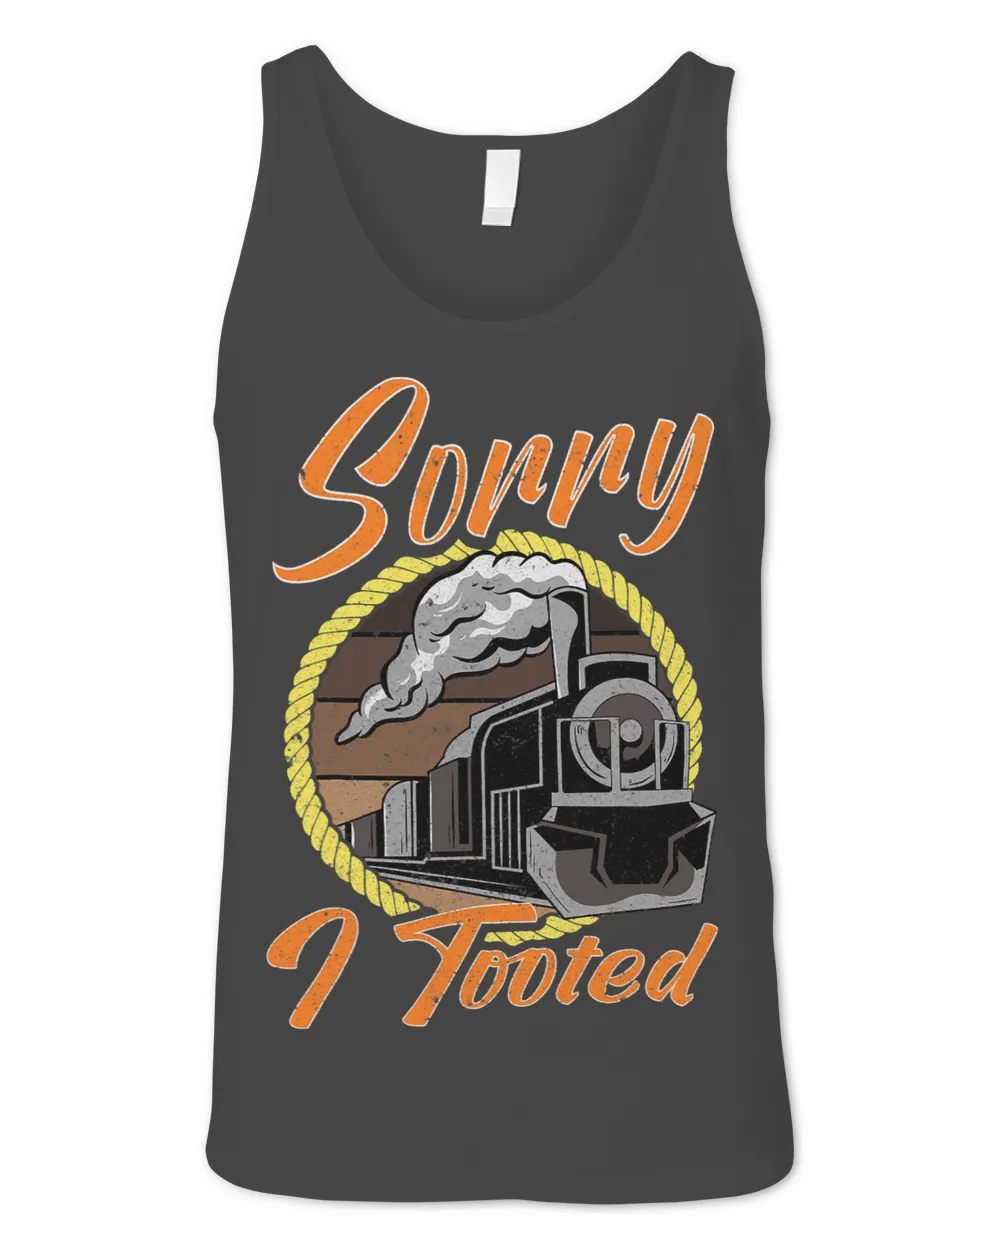 Sorry I Tooted Train EngineerTrain Lover Railroad Gift